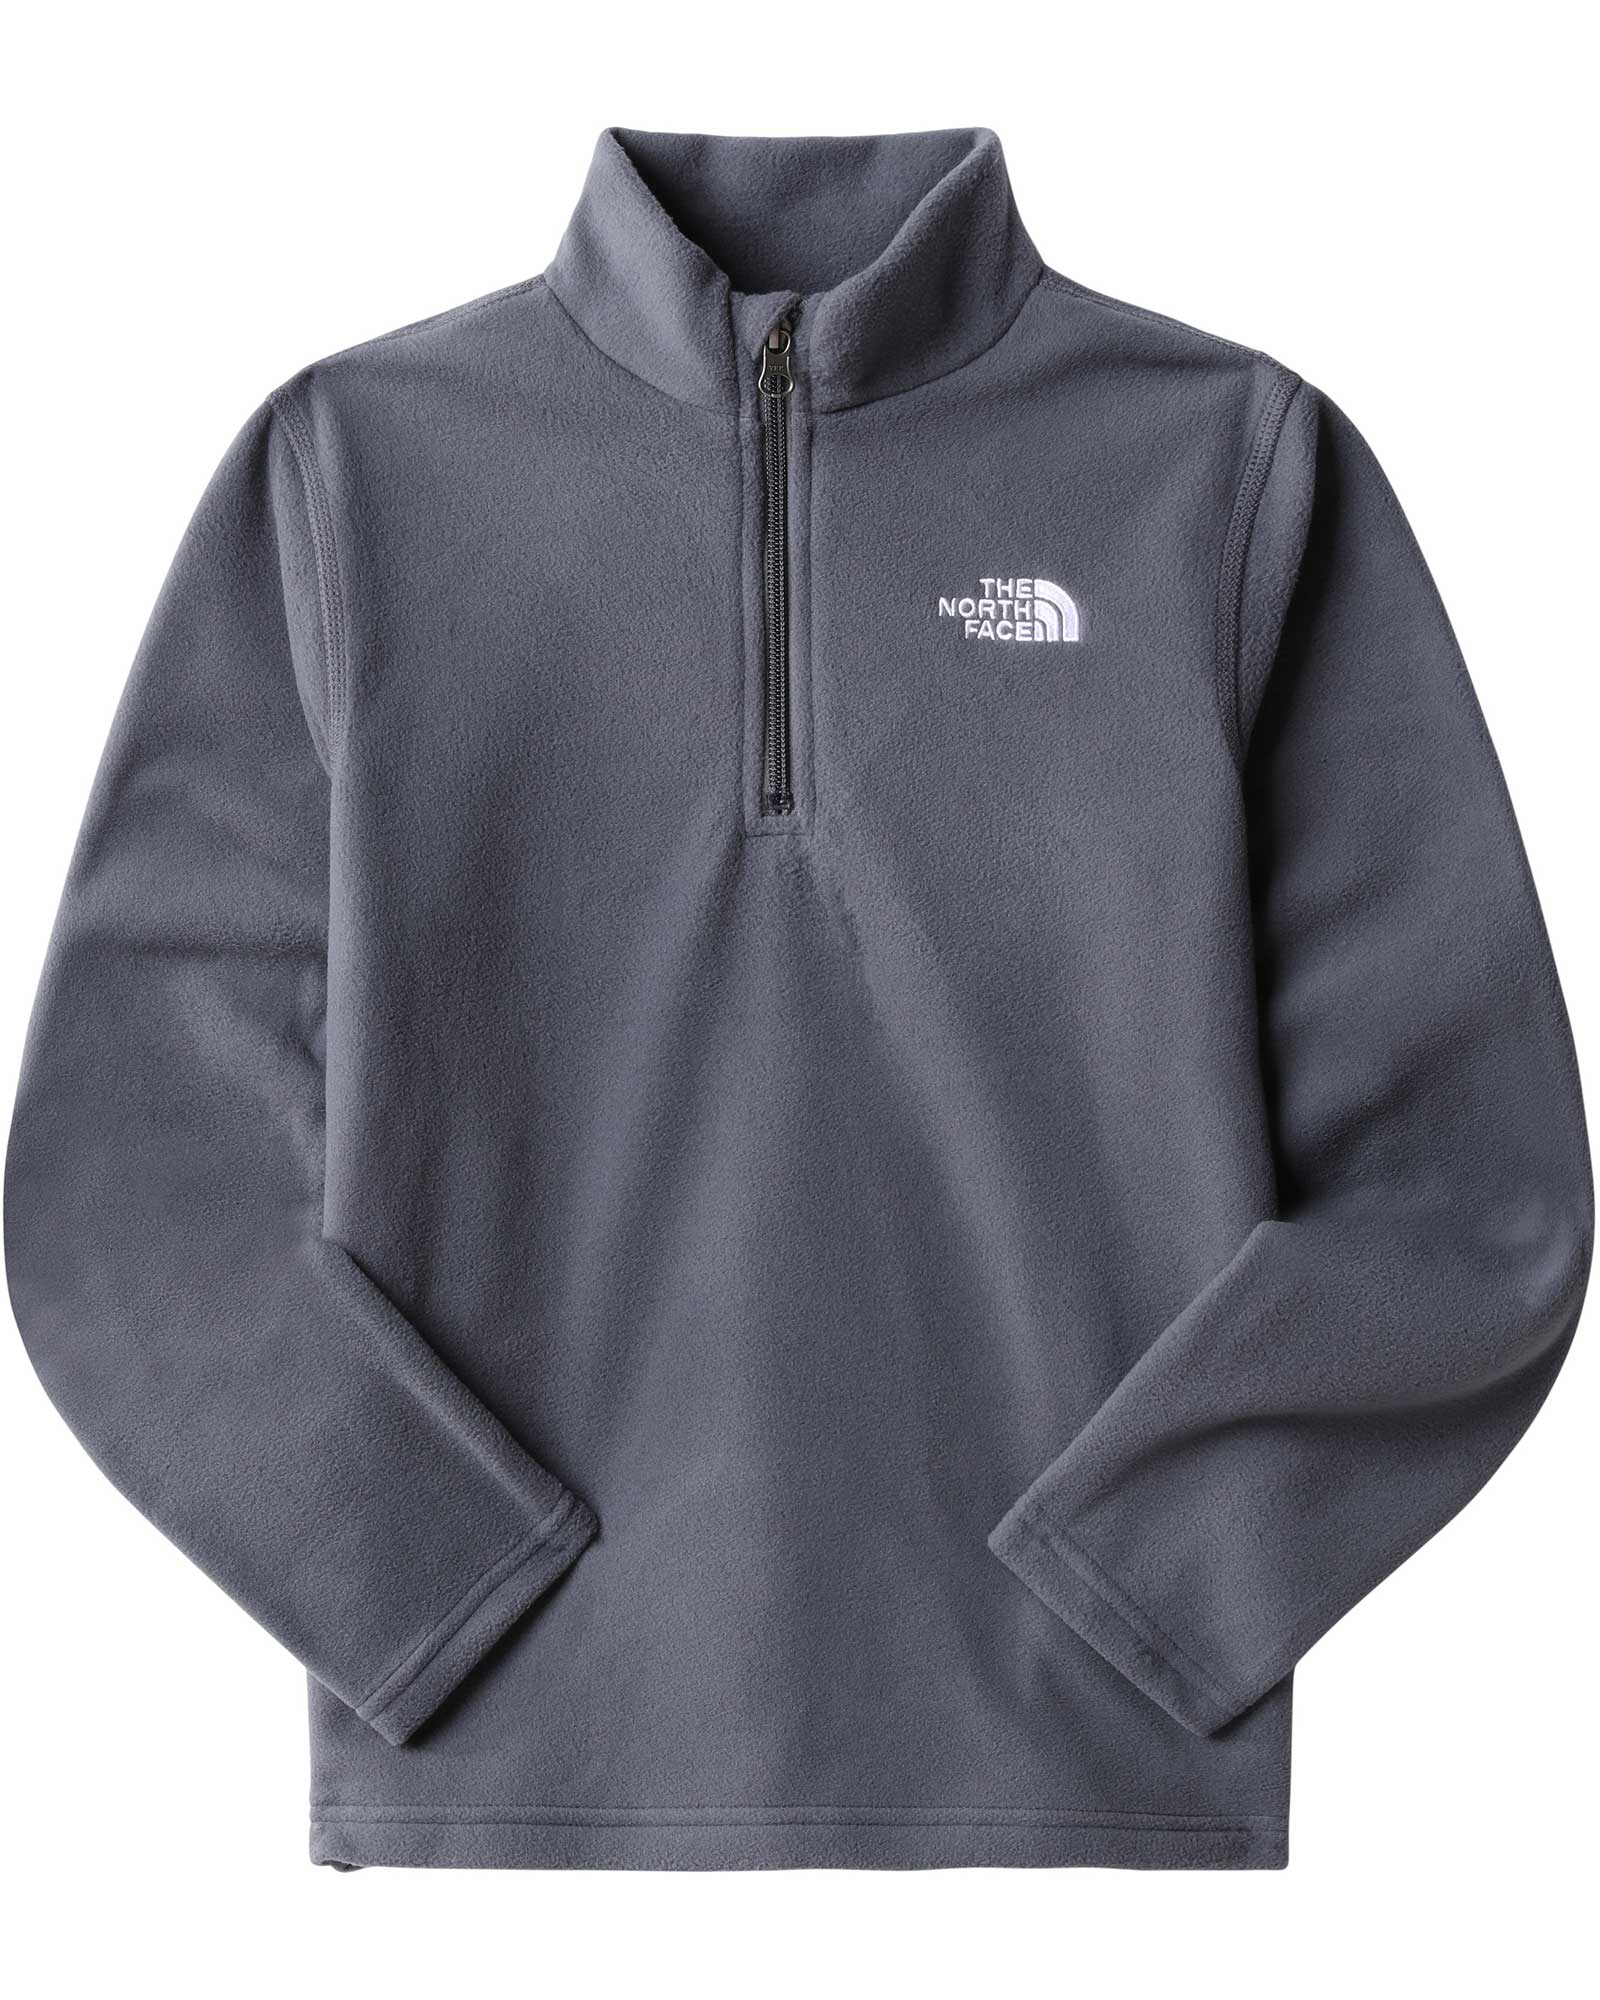 Product image of The North Face Glacier Kids' Zip Neck XL